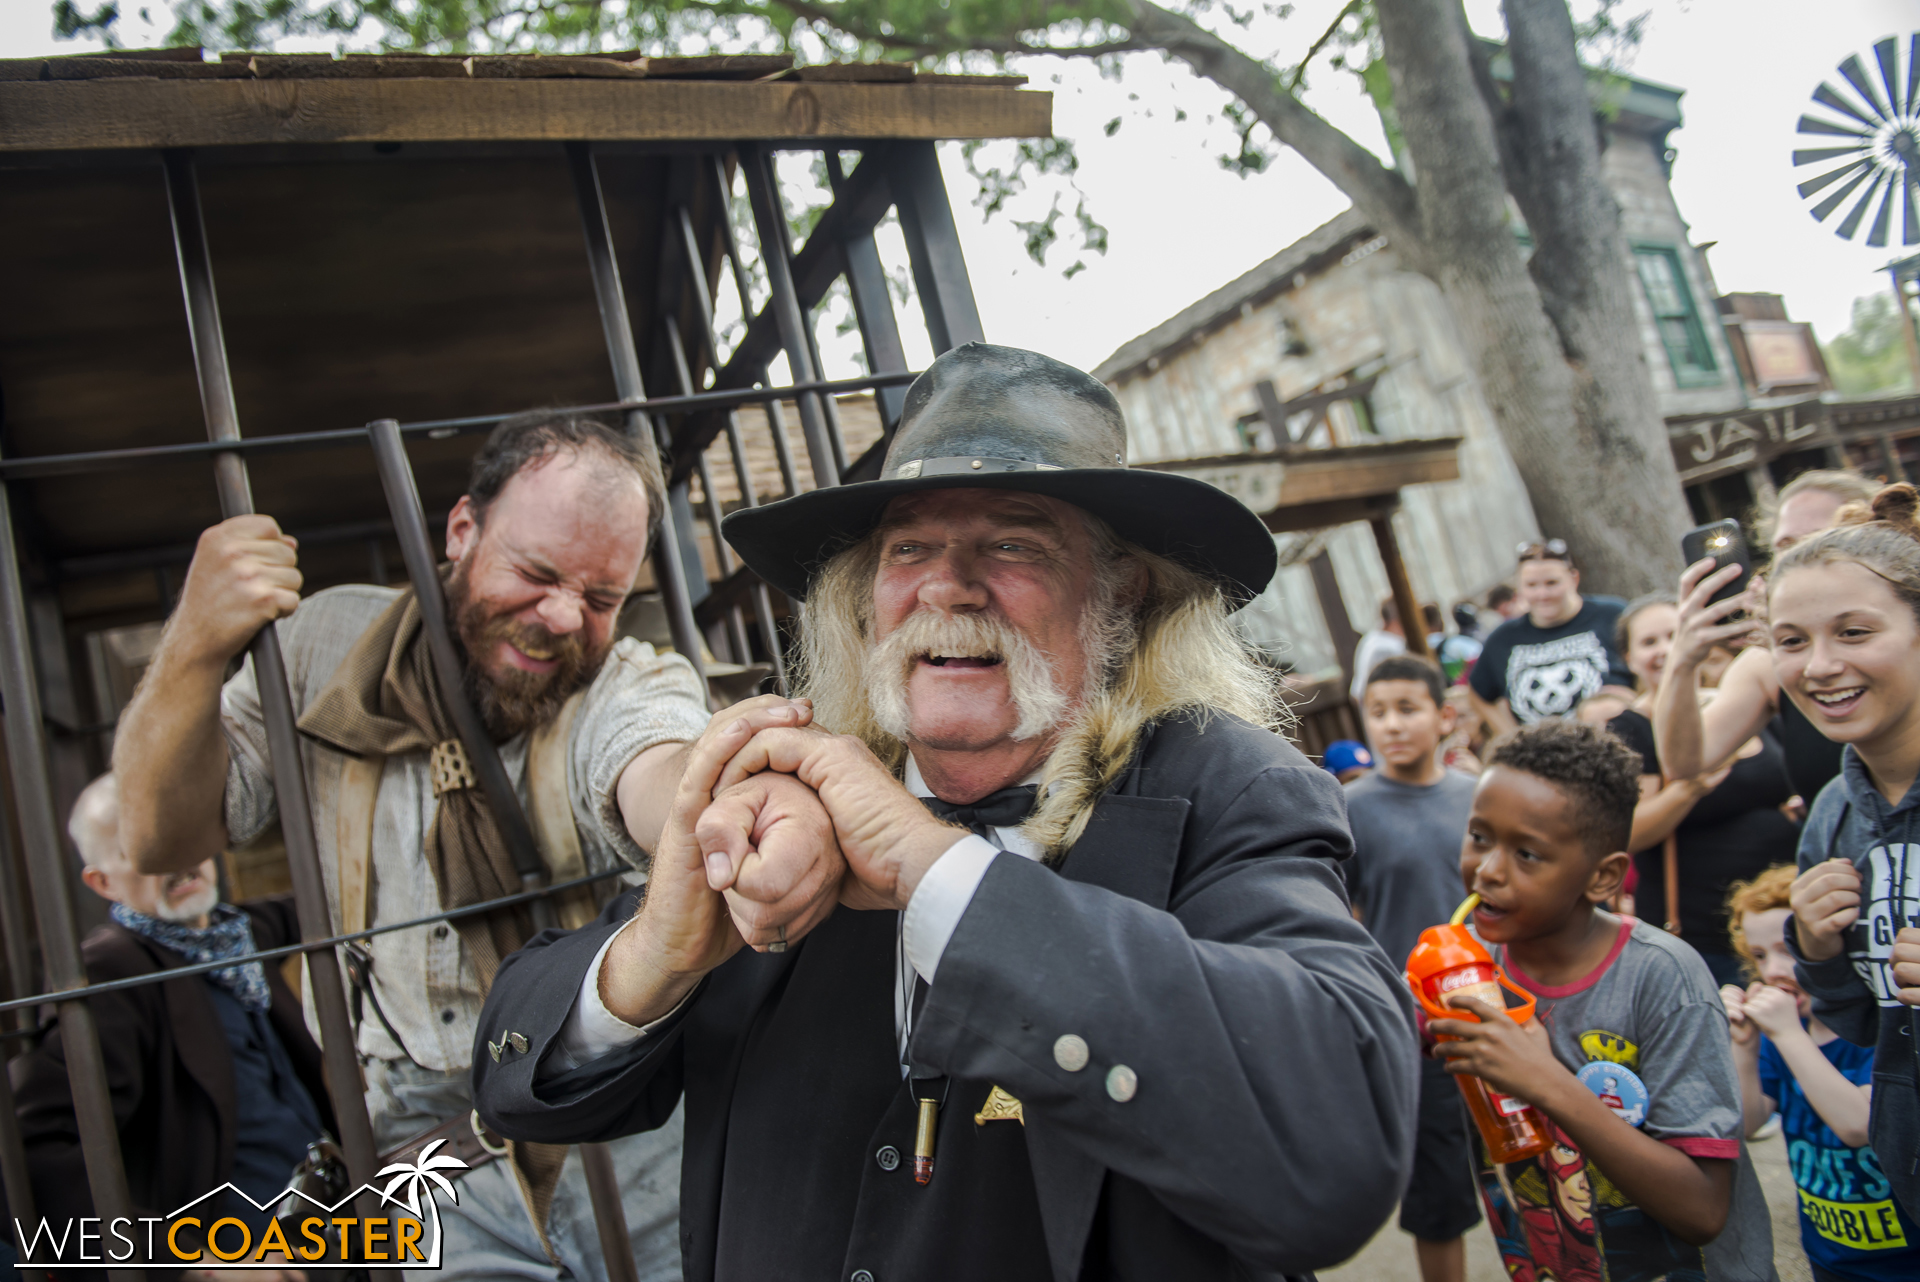  That's the Sheriff's way of having fun at Tiny's expense.&nbsp; Prisoners rights weren't a thing back in the 1800s! 